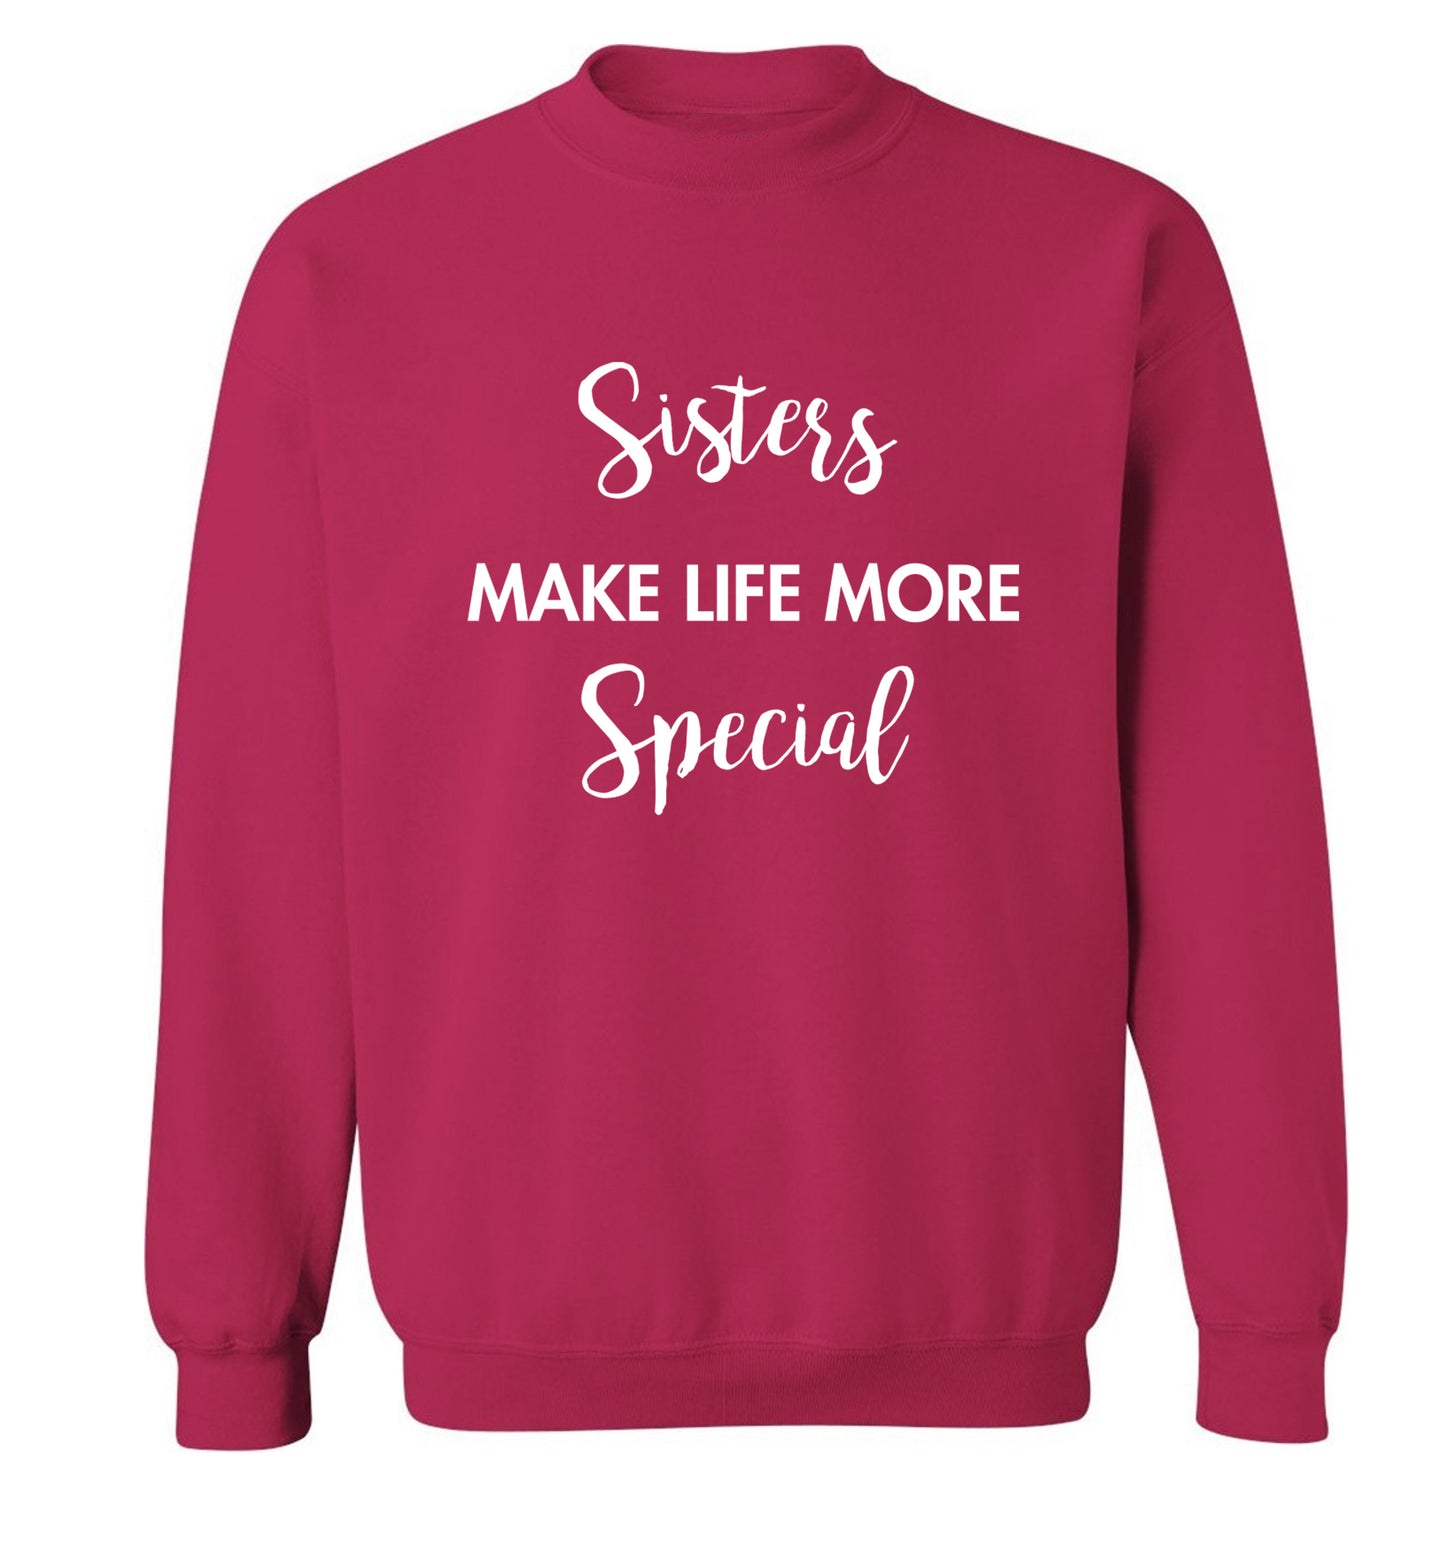 Sisters make life more special Adult's unisex pink Sweater 2XL